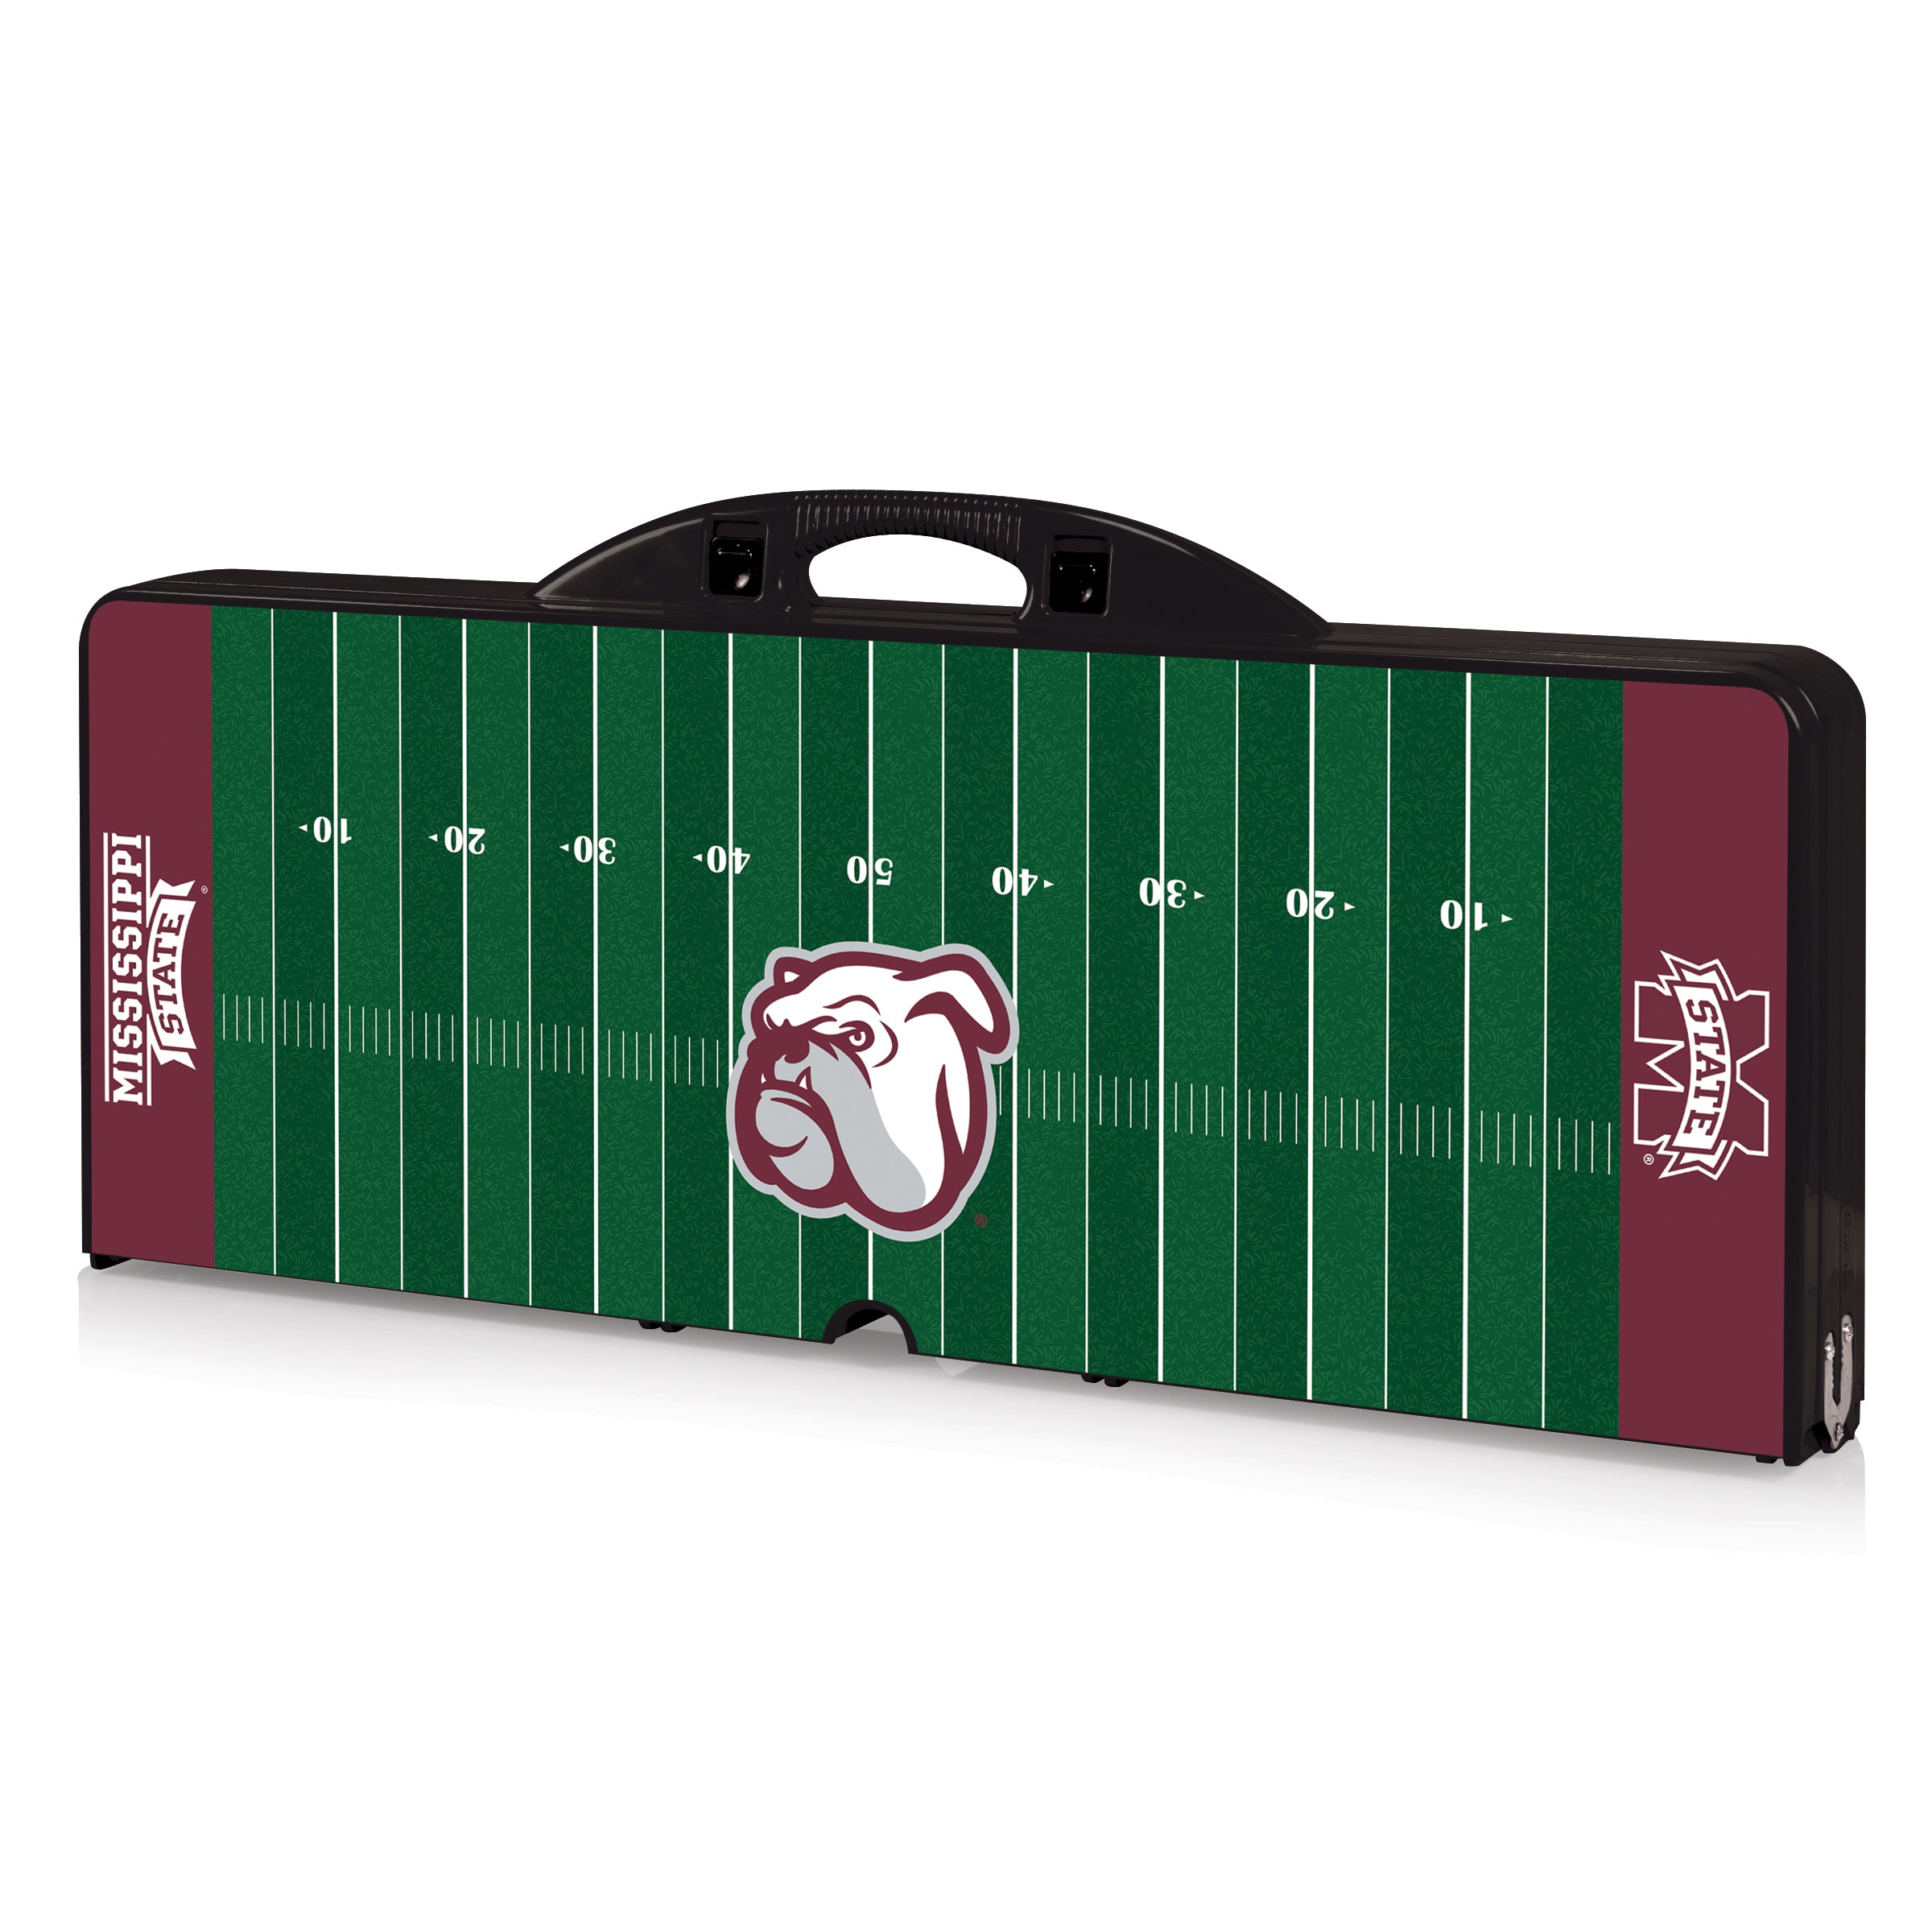 Mississippi State Bulldogs Football Field - Picnic Table Portable Folding Table with Seats